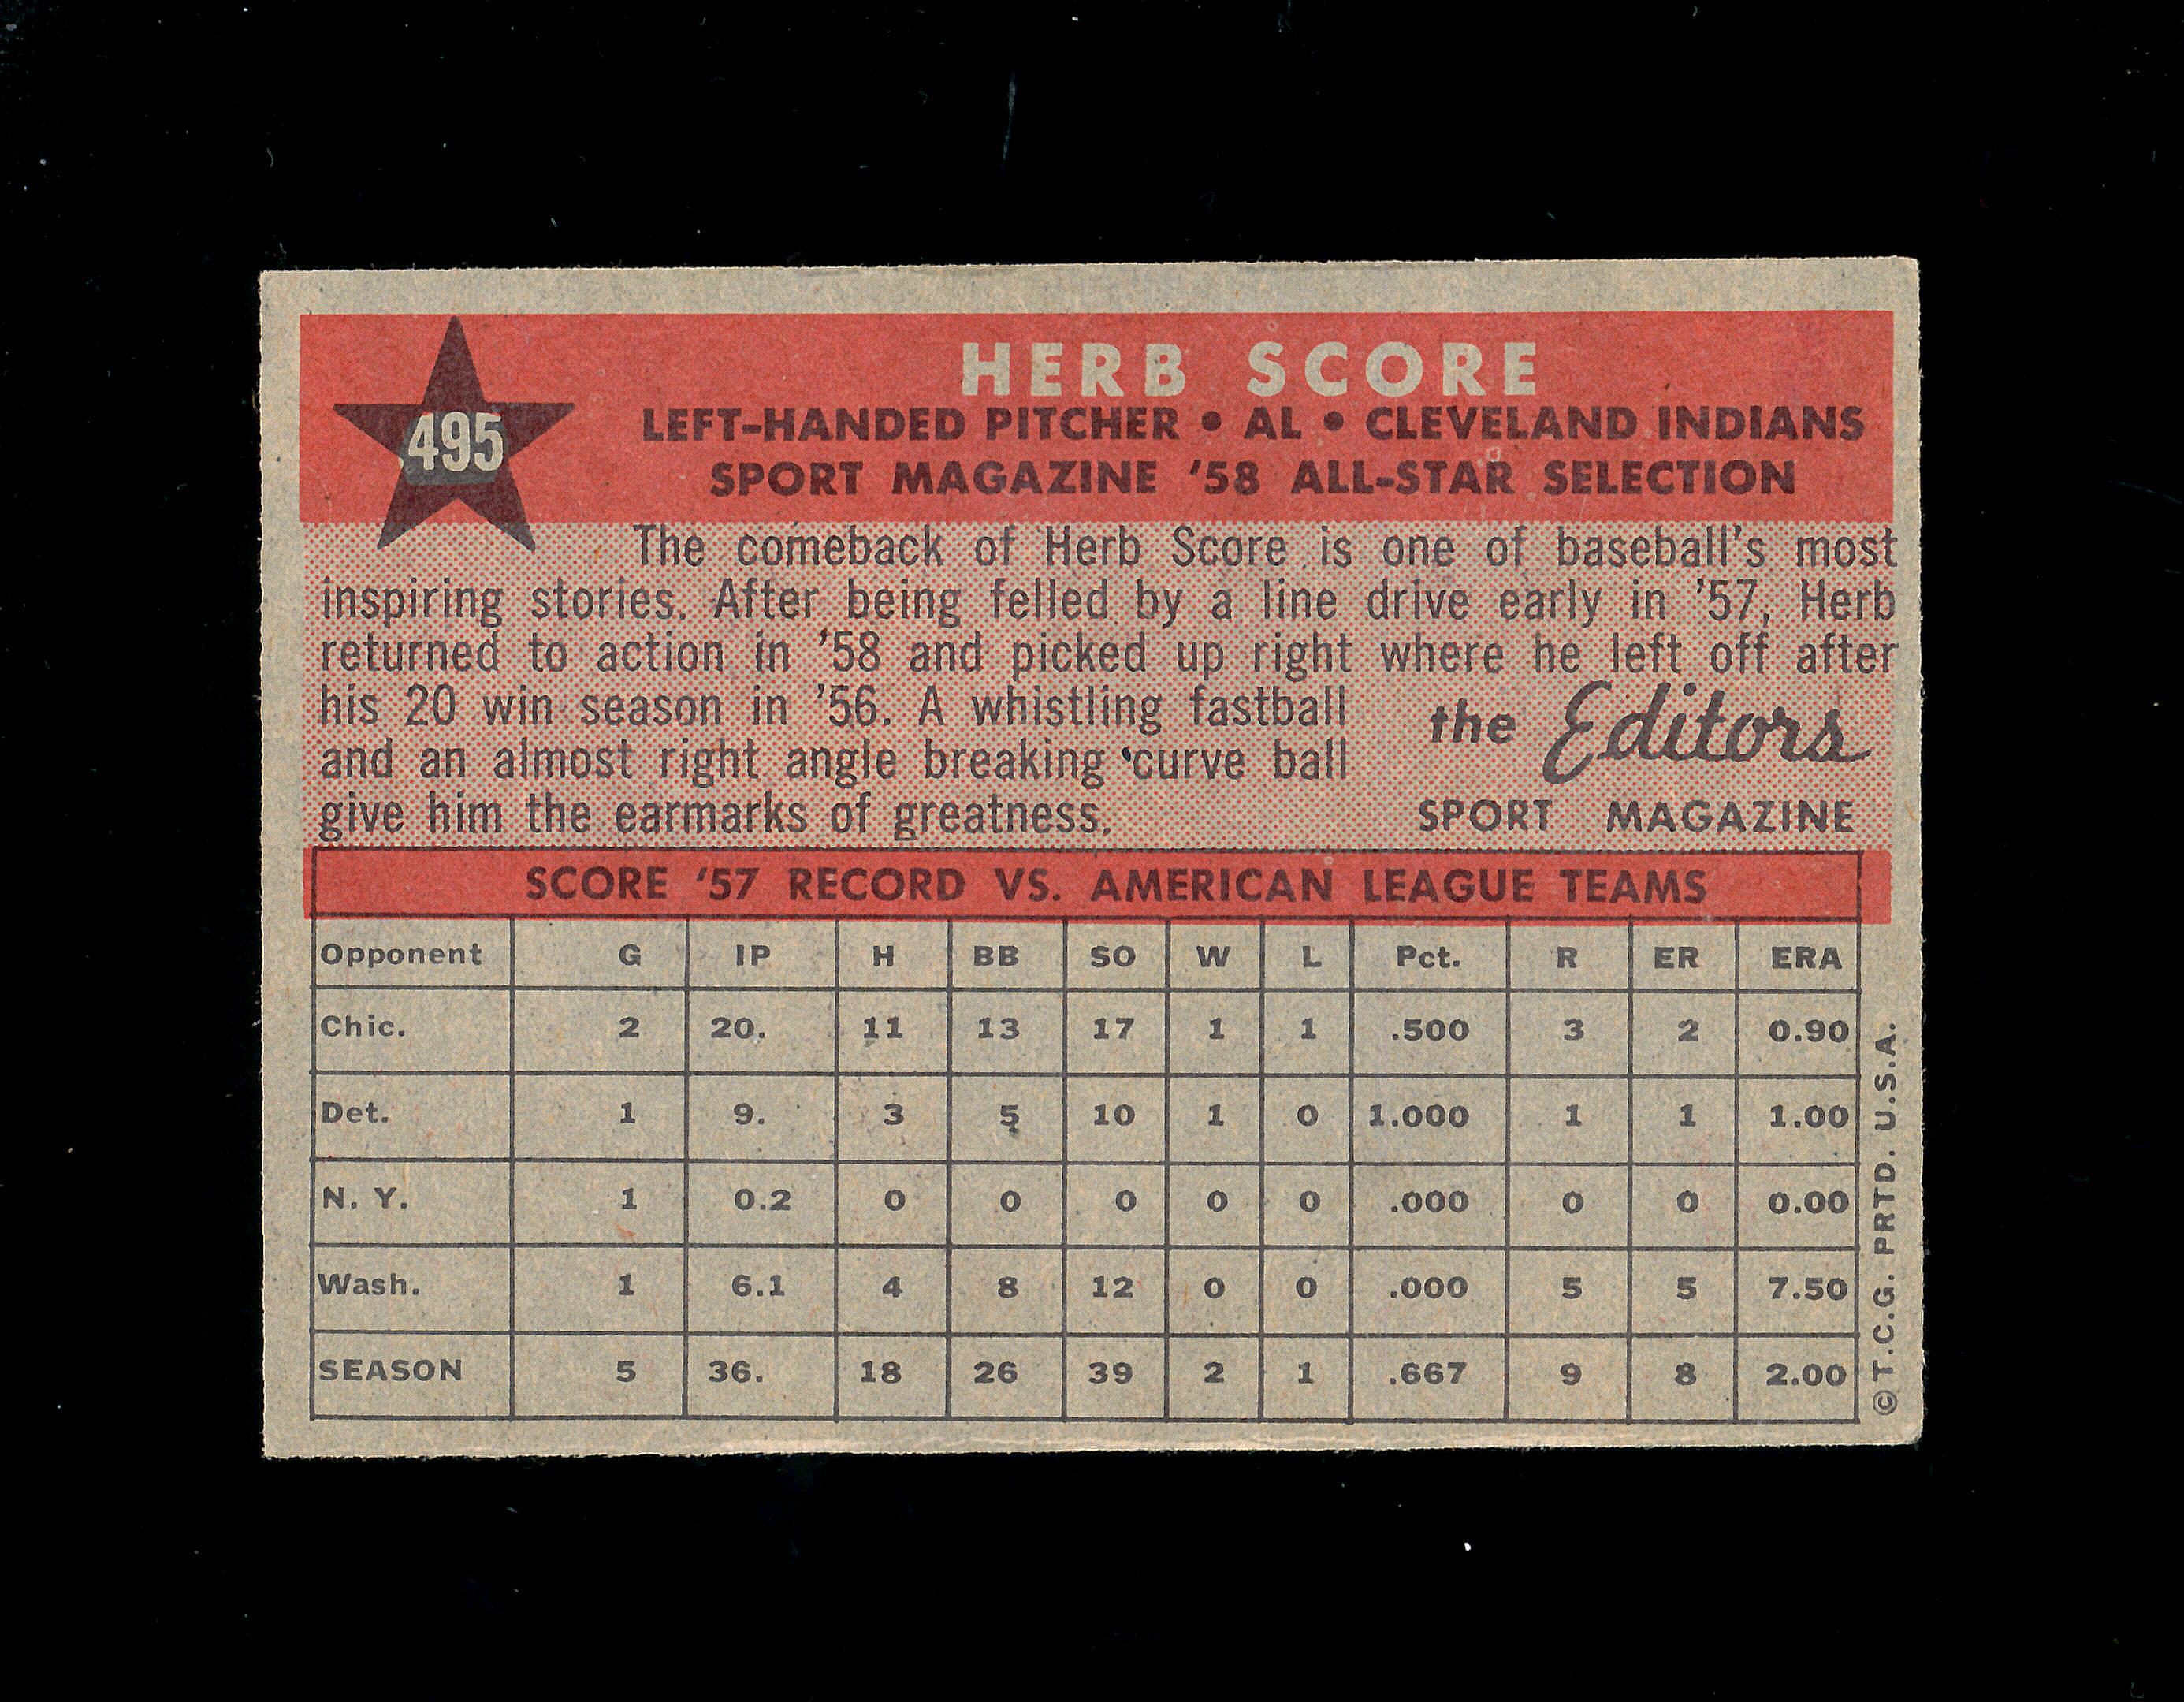 1958 Topps All Star Baseball Card #495 Herb Score Cleveland Indians. EX-MT